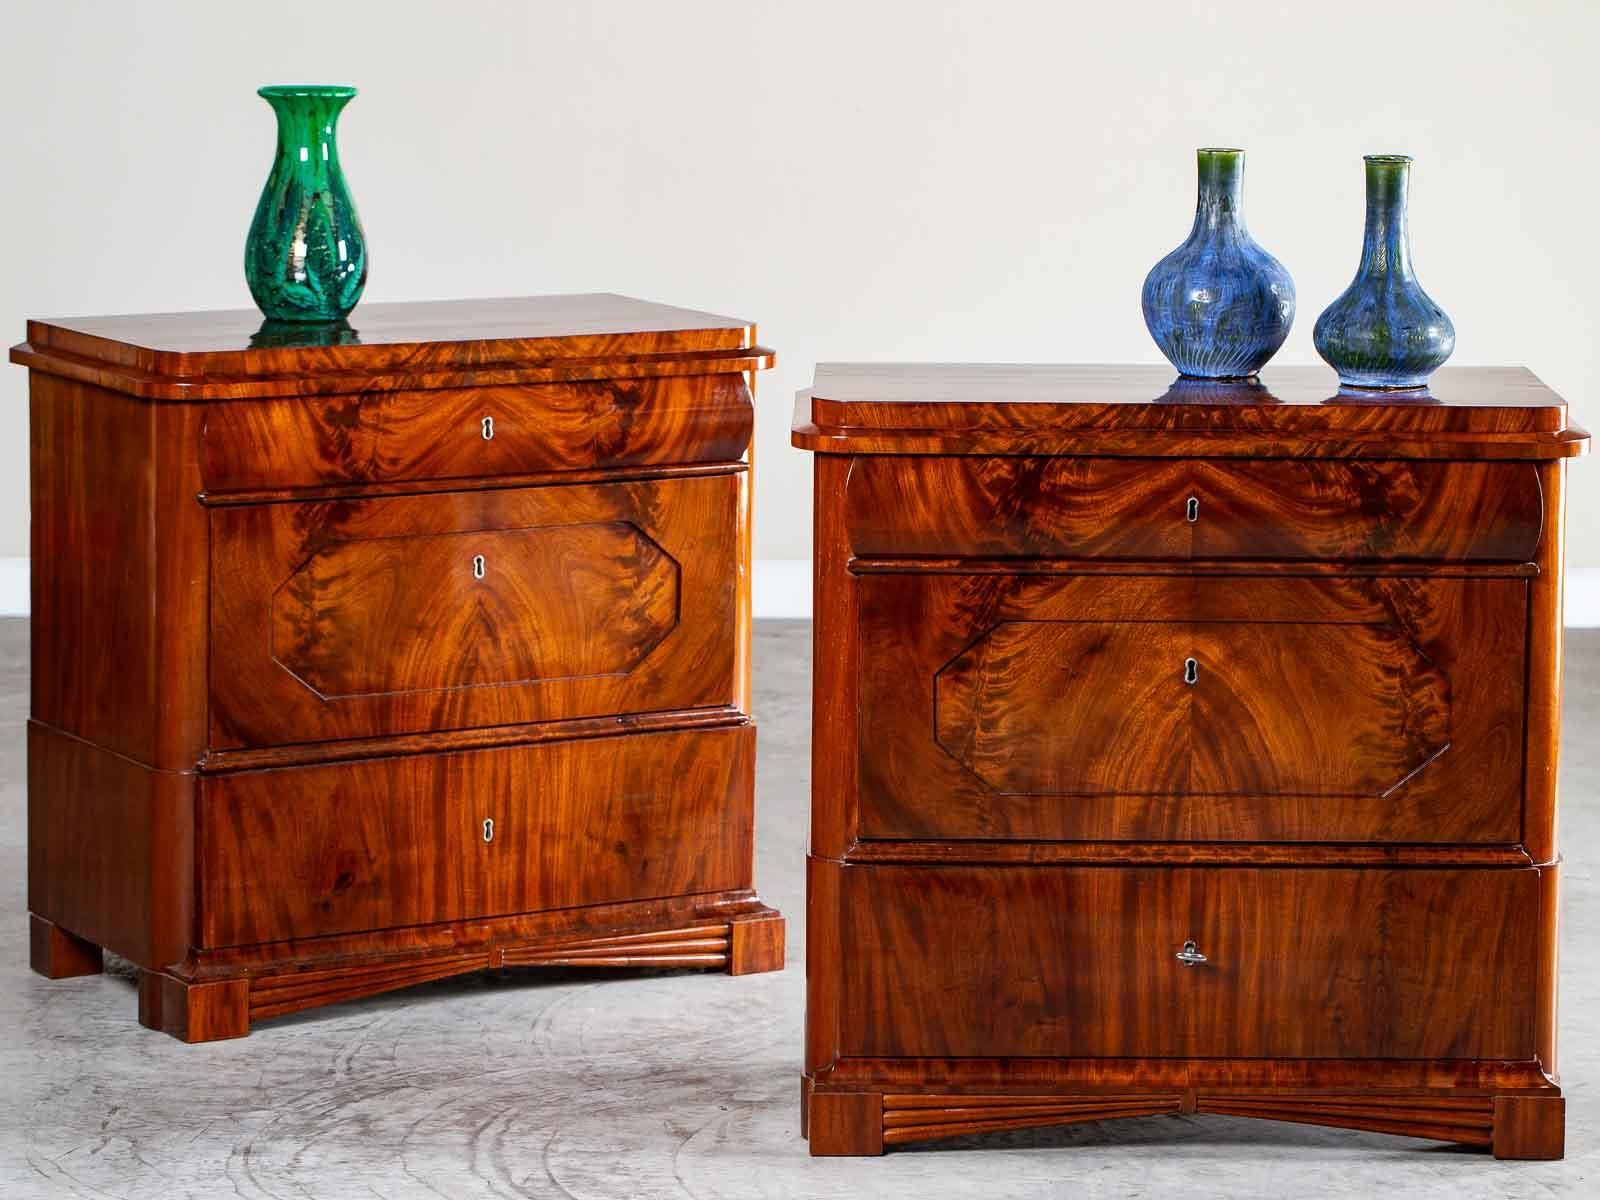 A pair of Biedermeier period mahogany chests from North Germany, circa 1820. The distinctive shape of this pair of antique chests reflect the architectural styling notable during the early part of the nineteenth century. Fashioned entirely of